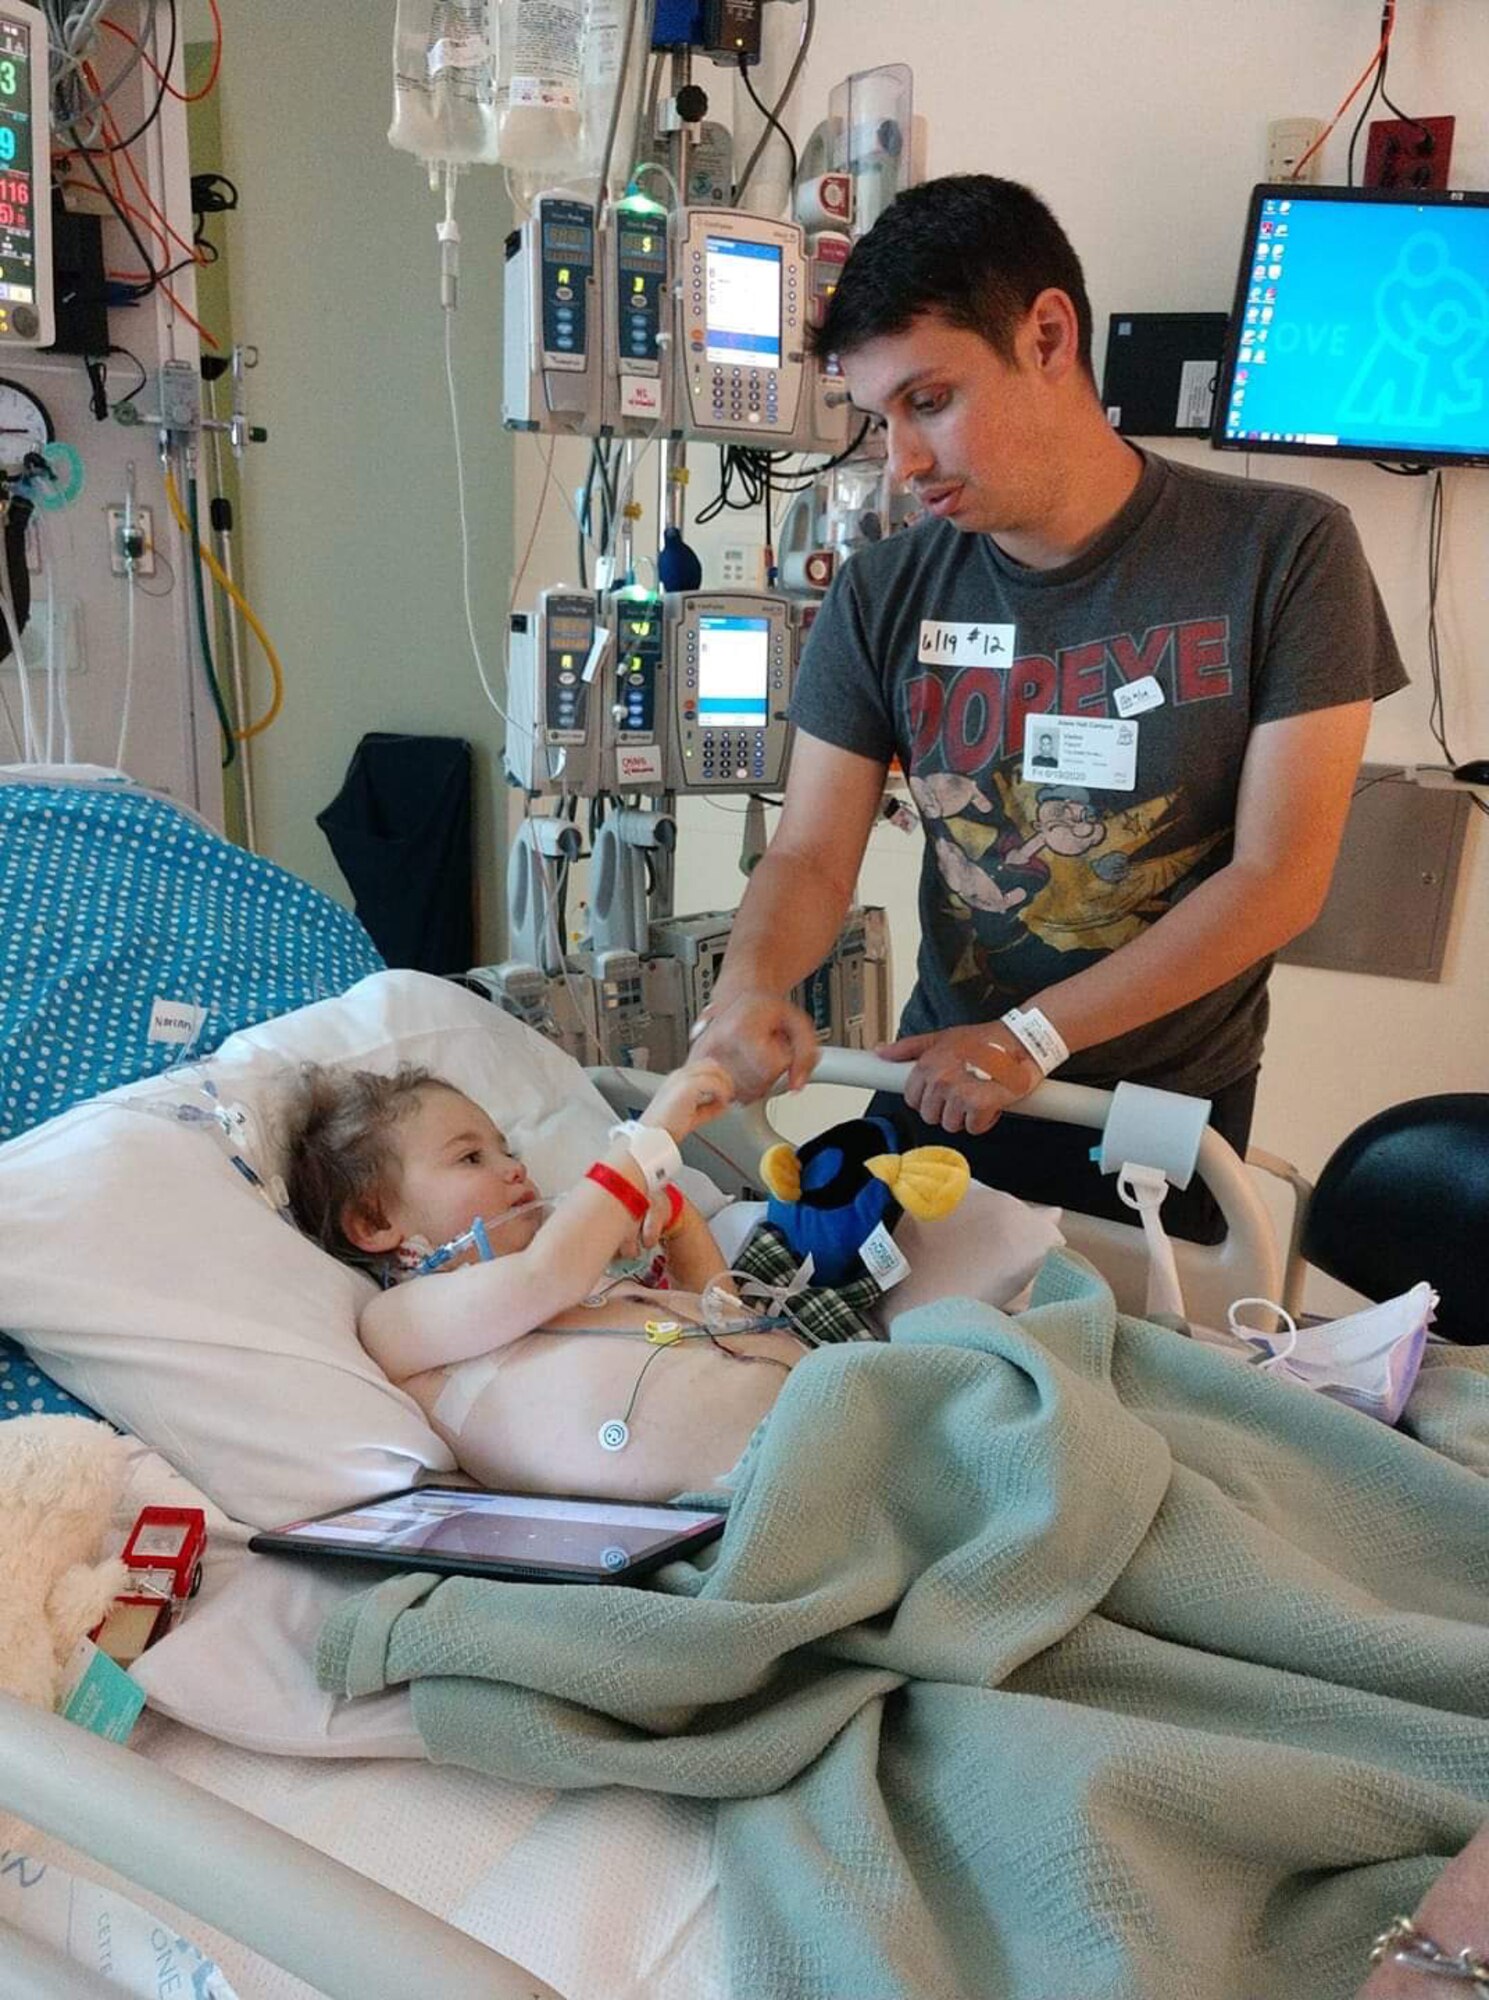 Senior Airman Anthony Gauna Jr. fist bumps with his son Anthony Gauna III in a hospital bed.